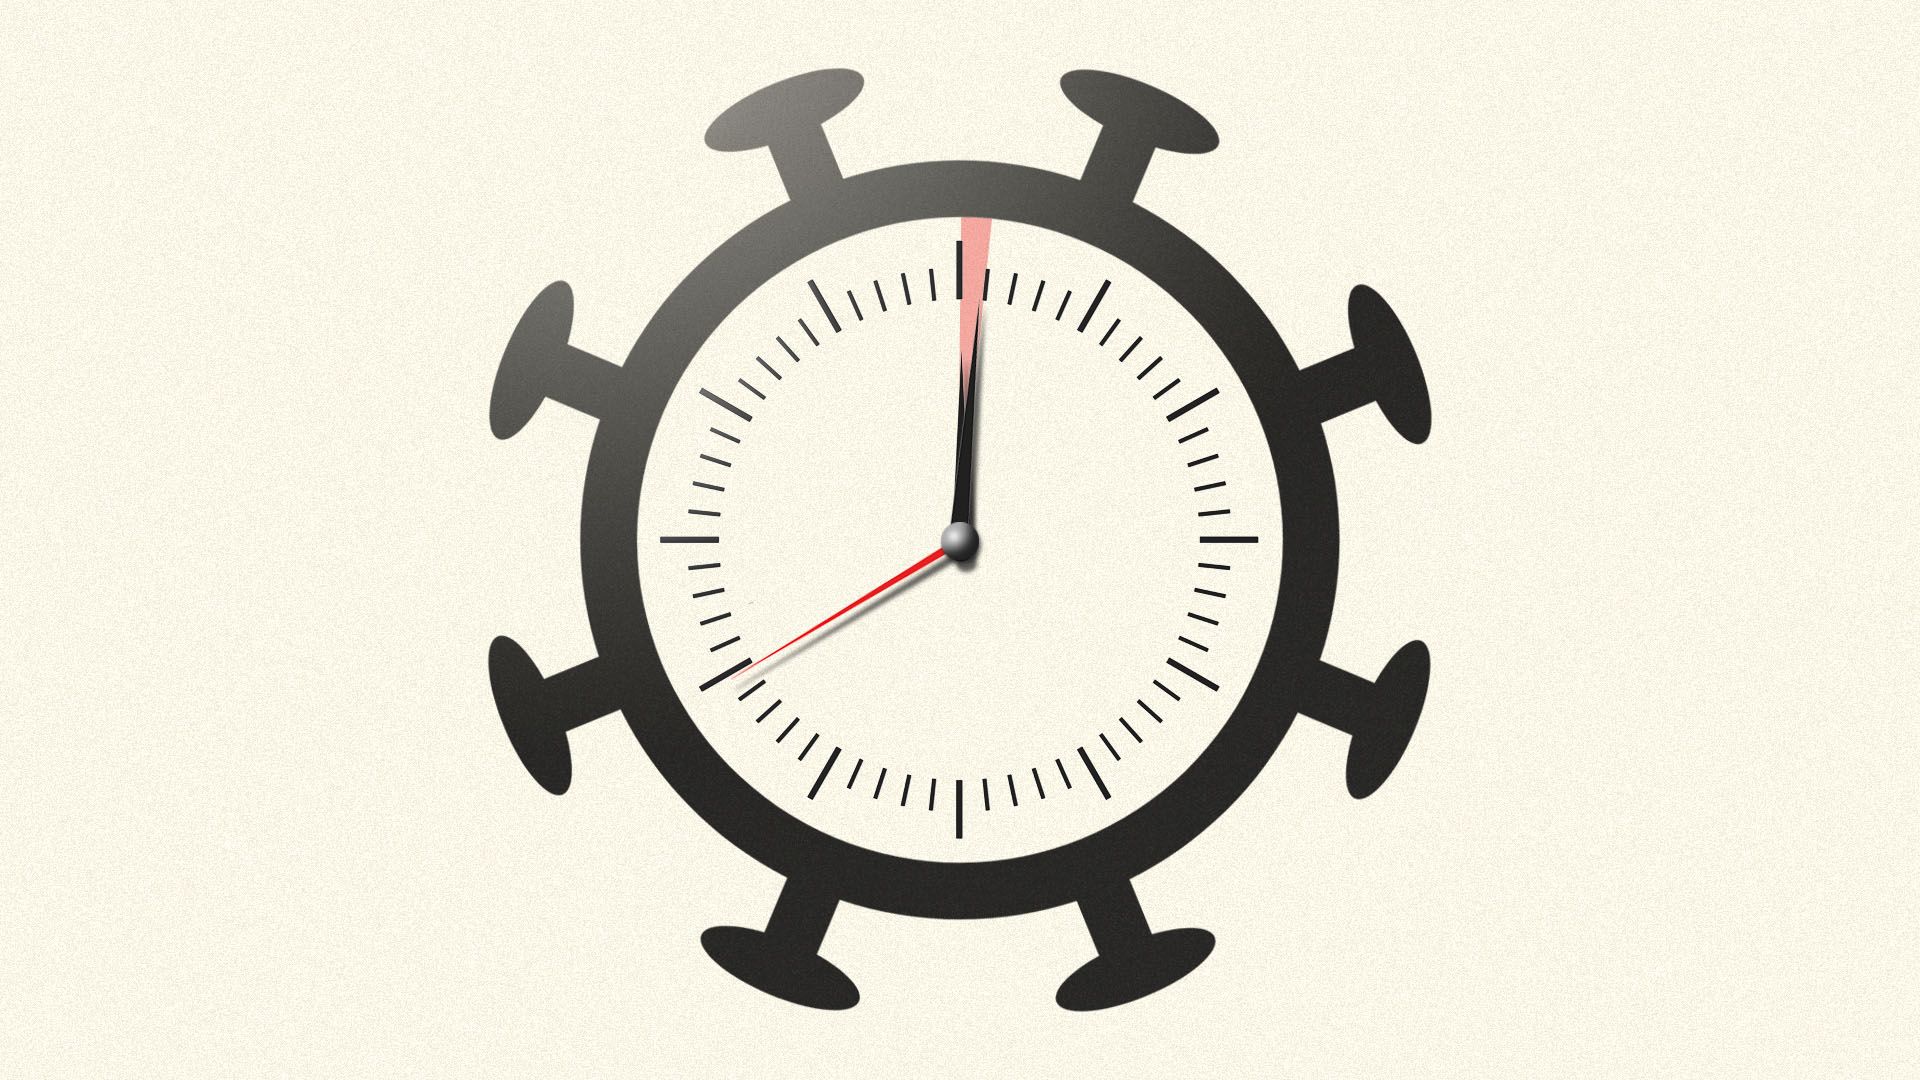 Illustration of an alarm clock shaped like a virus, with one minute highlighted in red